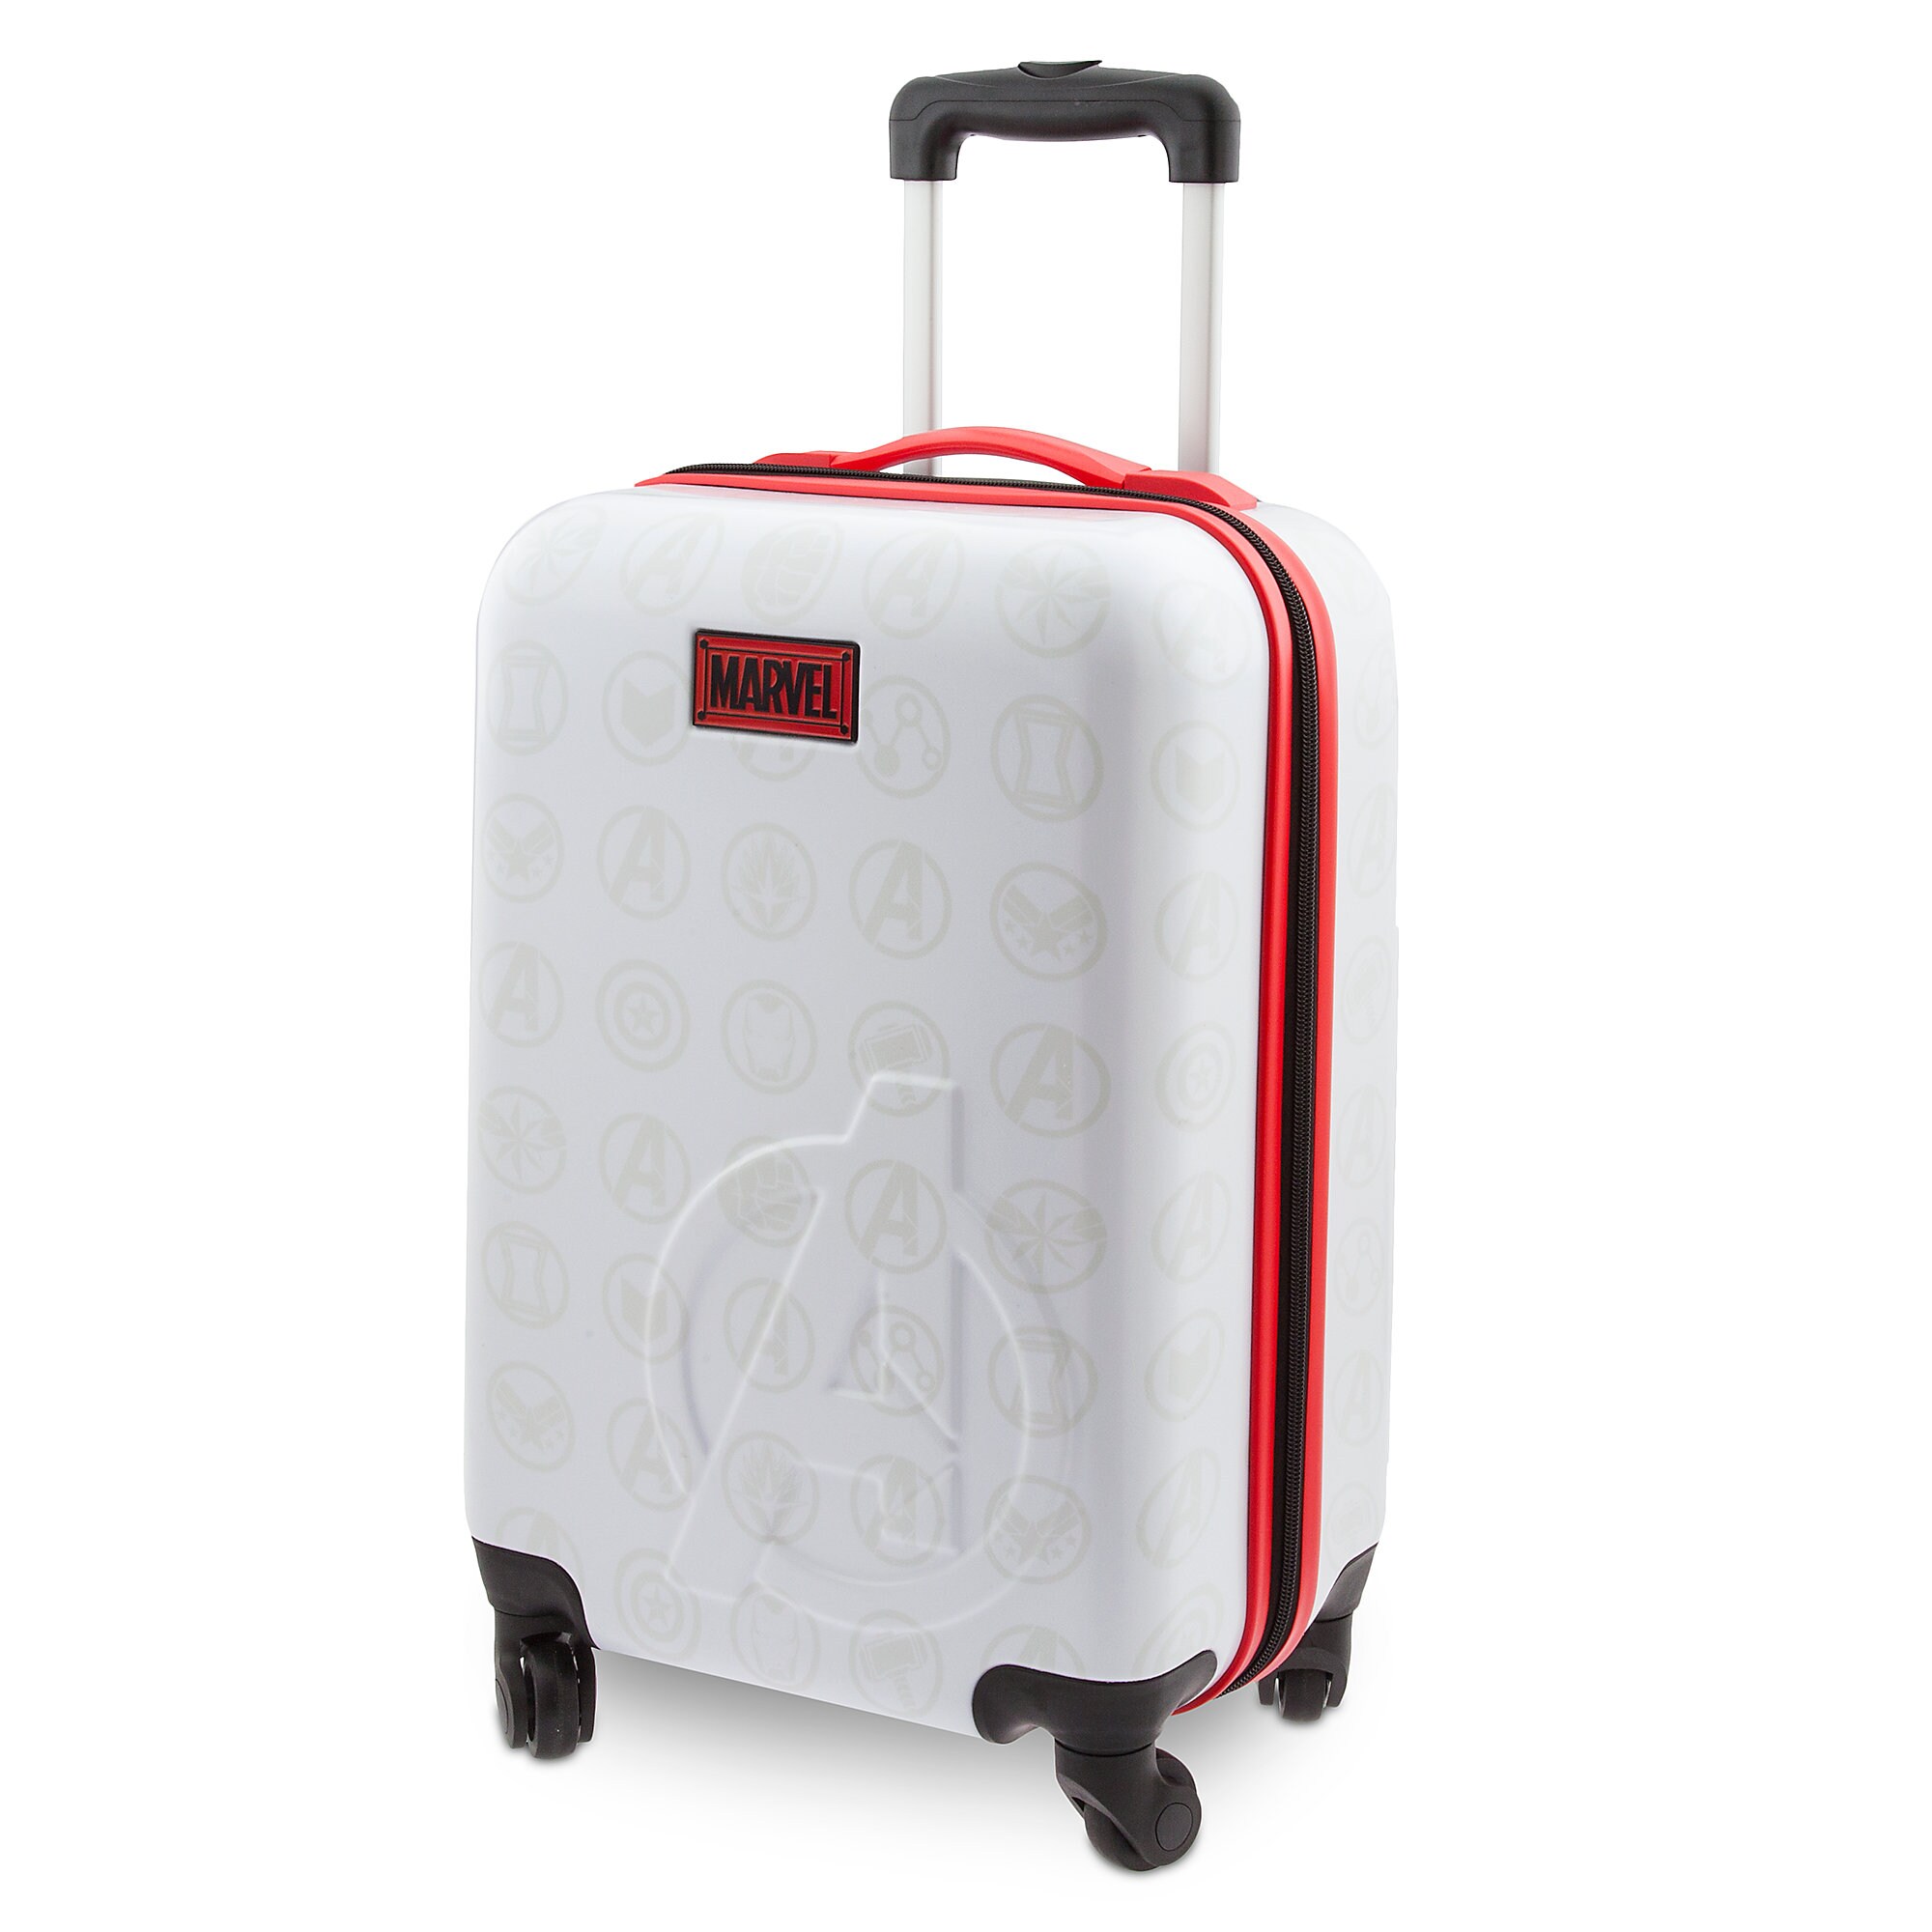 Marvel's Avengers Rolling Luggage - Small